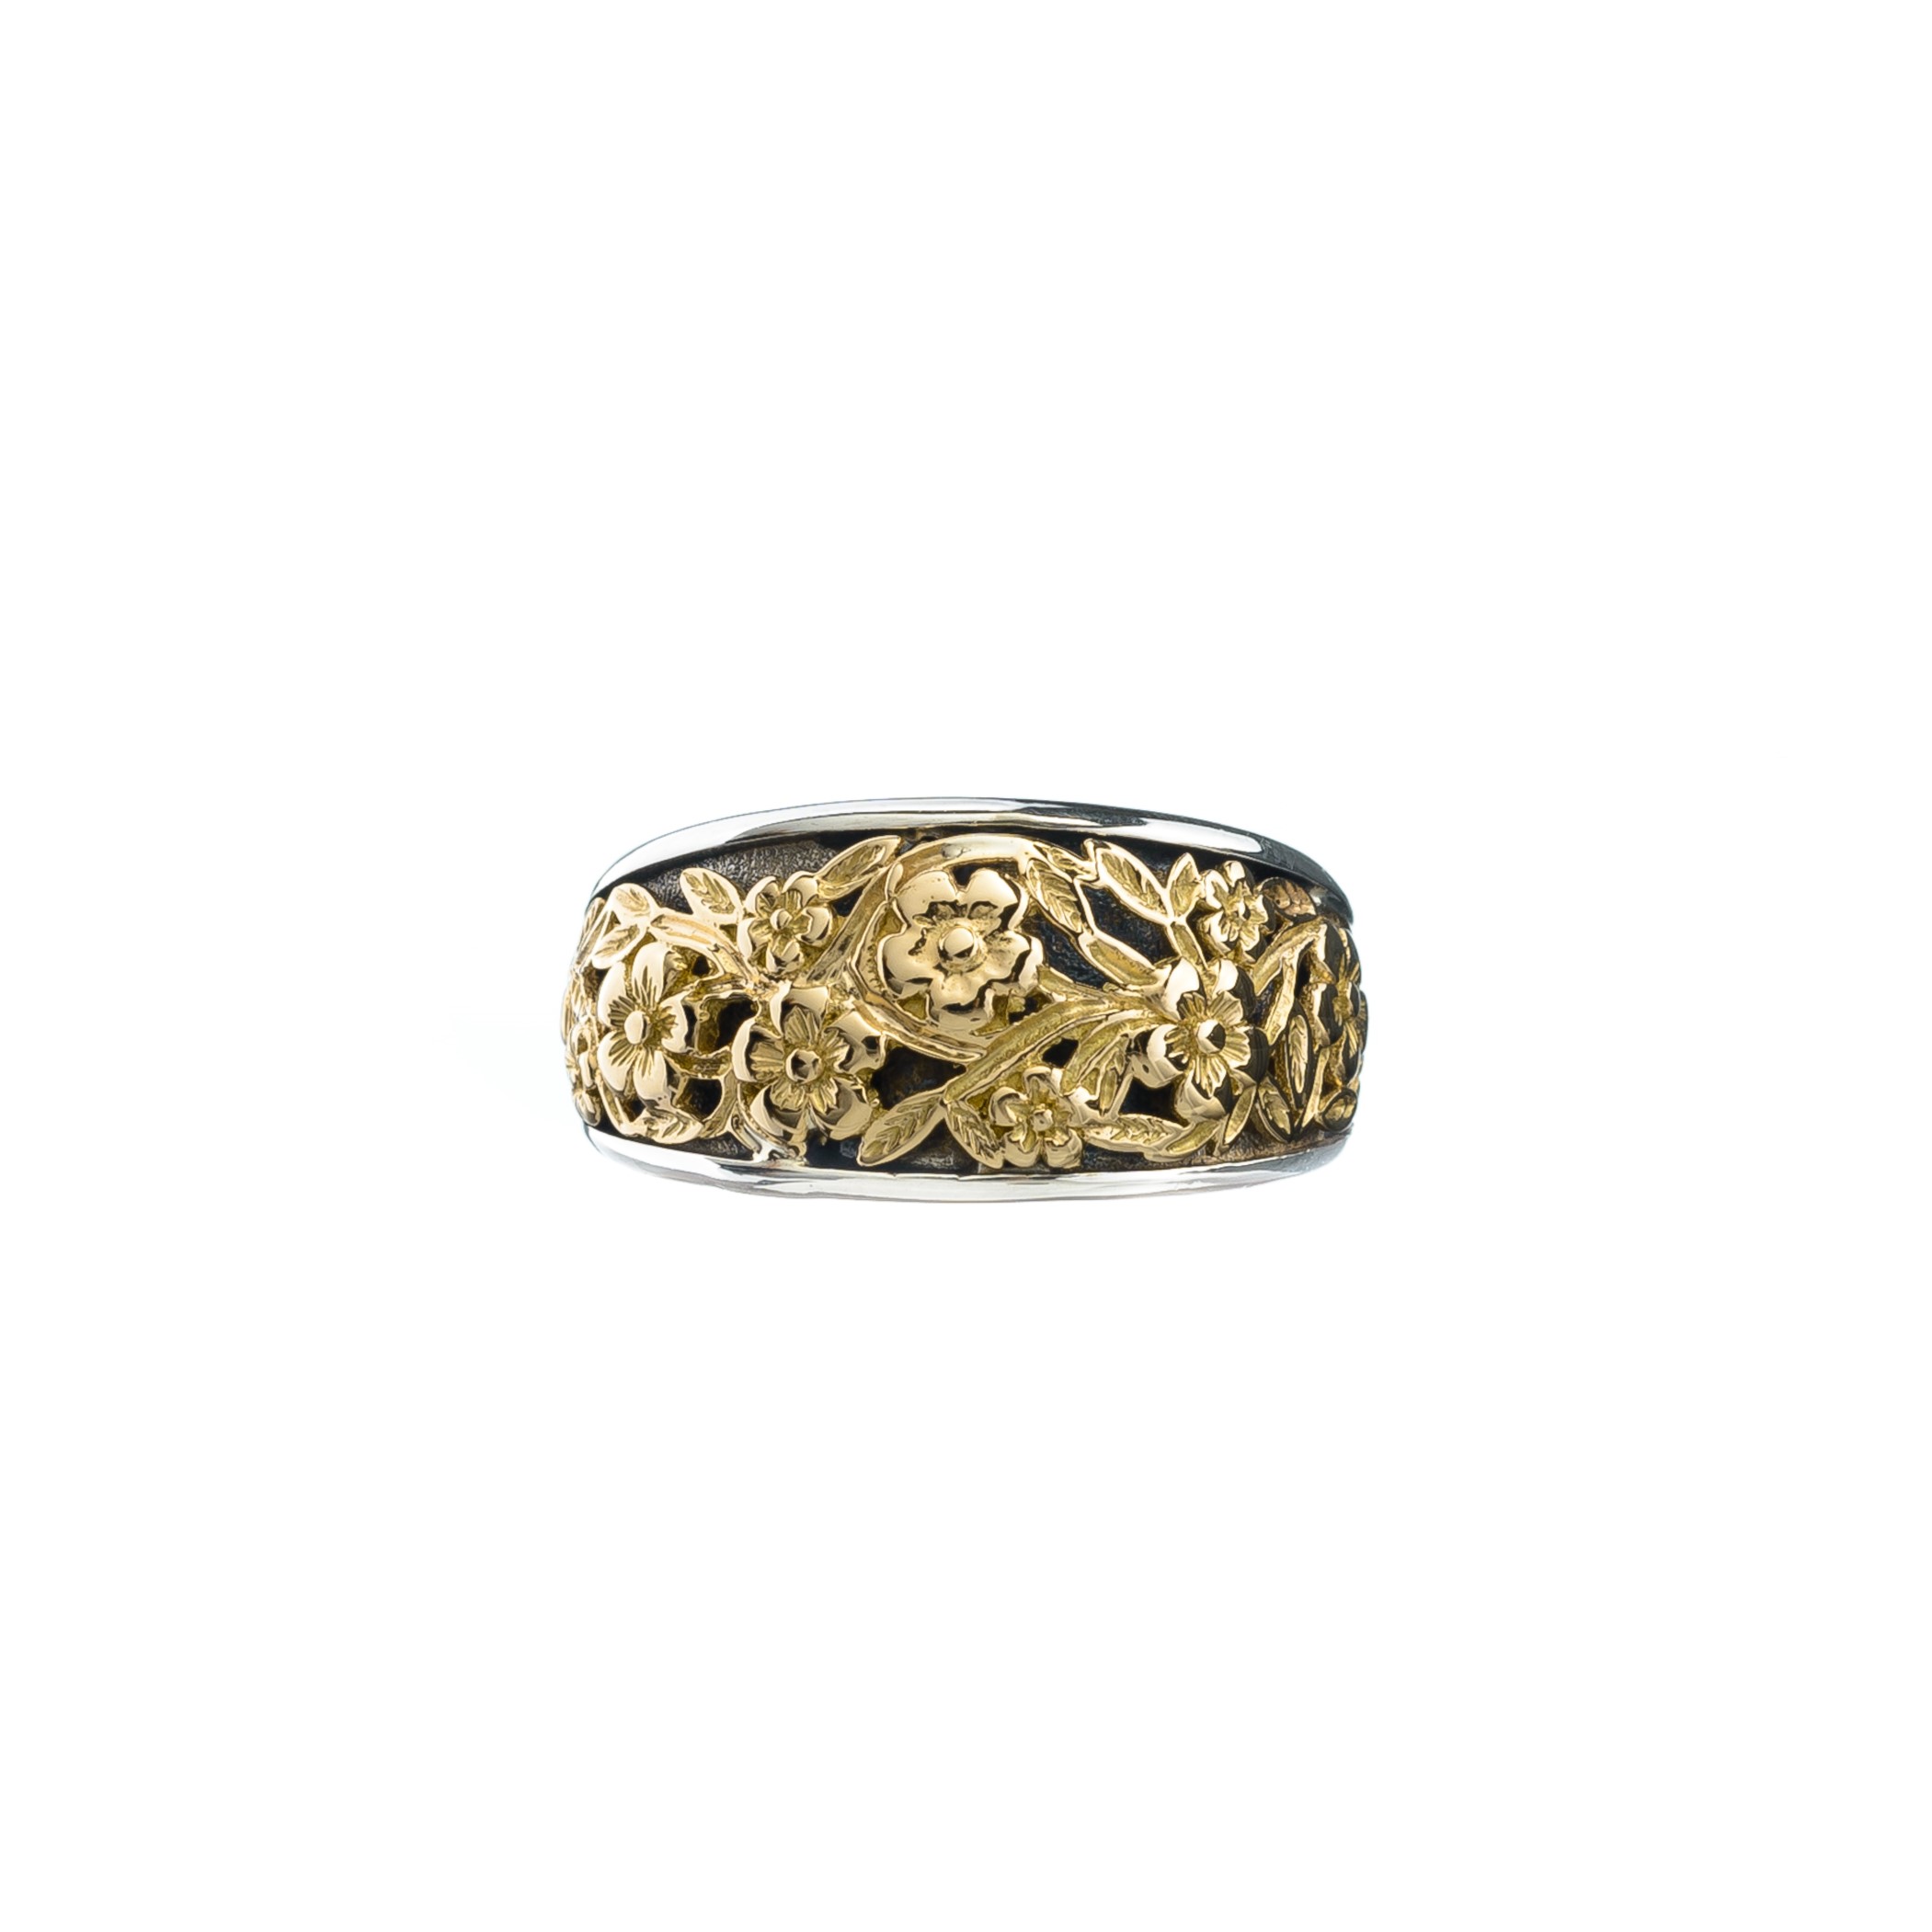 Harmony ring in 18K Gold and Sterling Silver